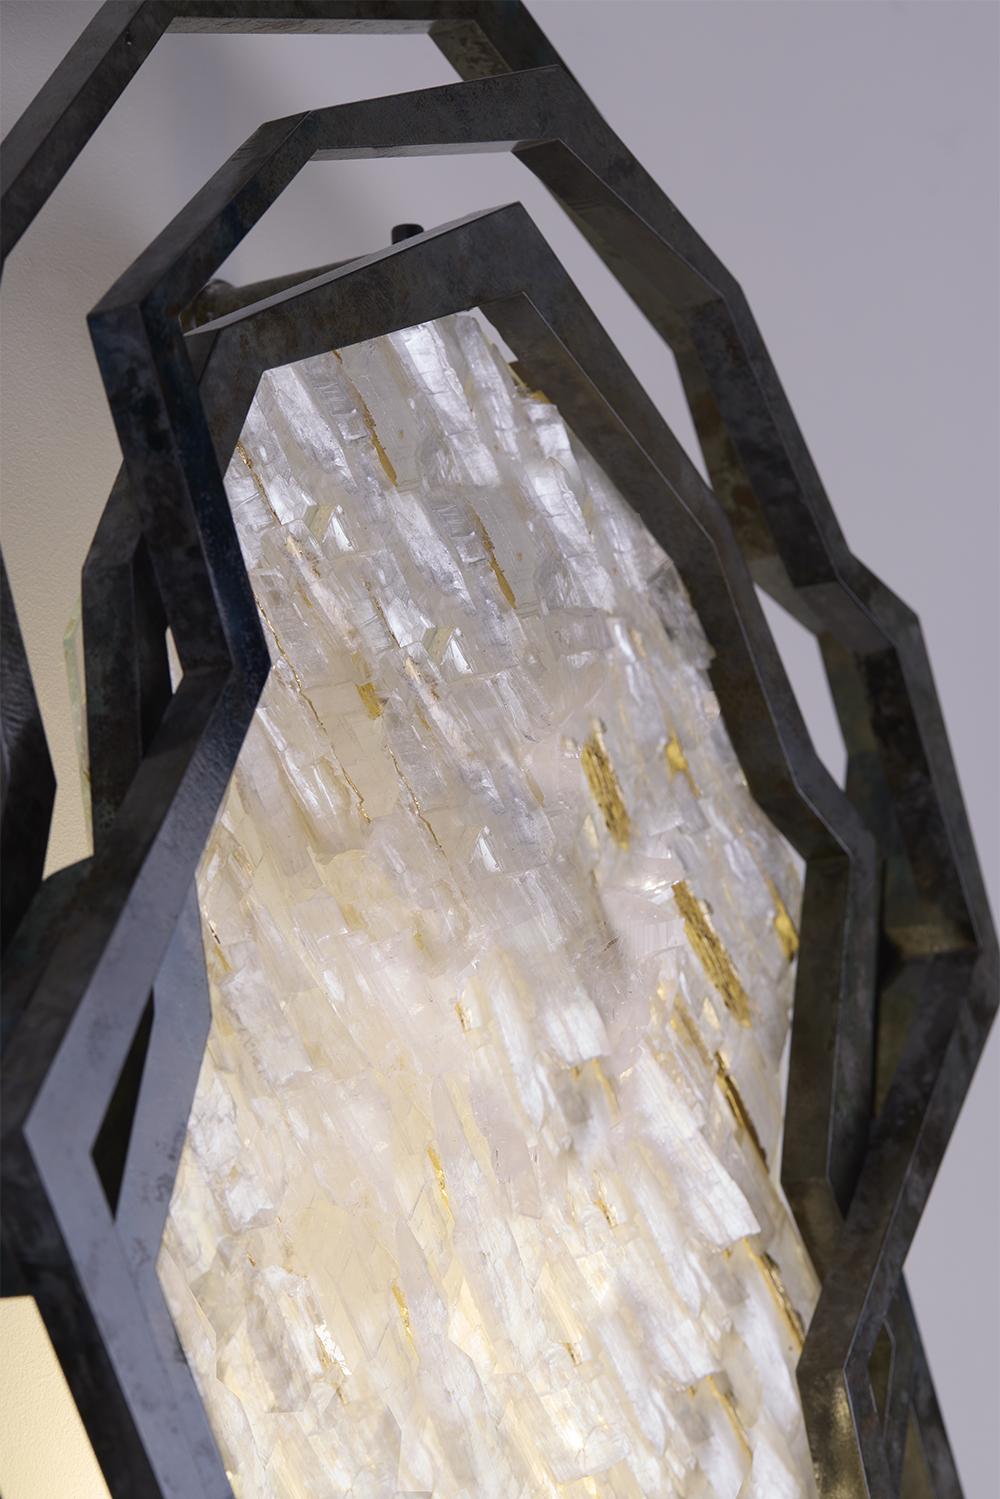 __
A destructured form, with a patina, for the P.Gouthière wall lamp associating
the transparency of the selenite to the reflections of the rock crystal.

__
Création : Antoine DARIULE

Antoine is a metal artist and designer. 
He publishes art